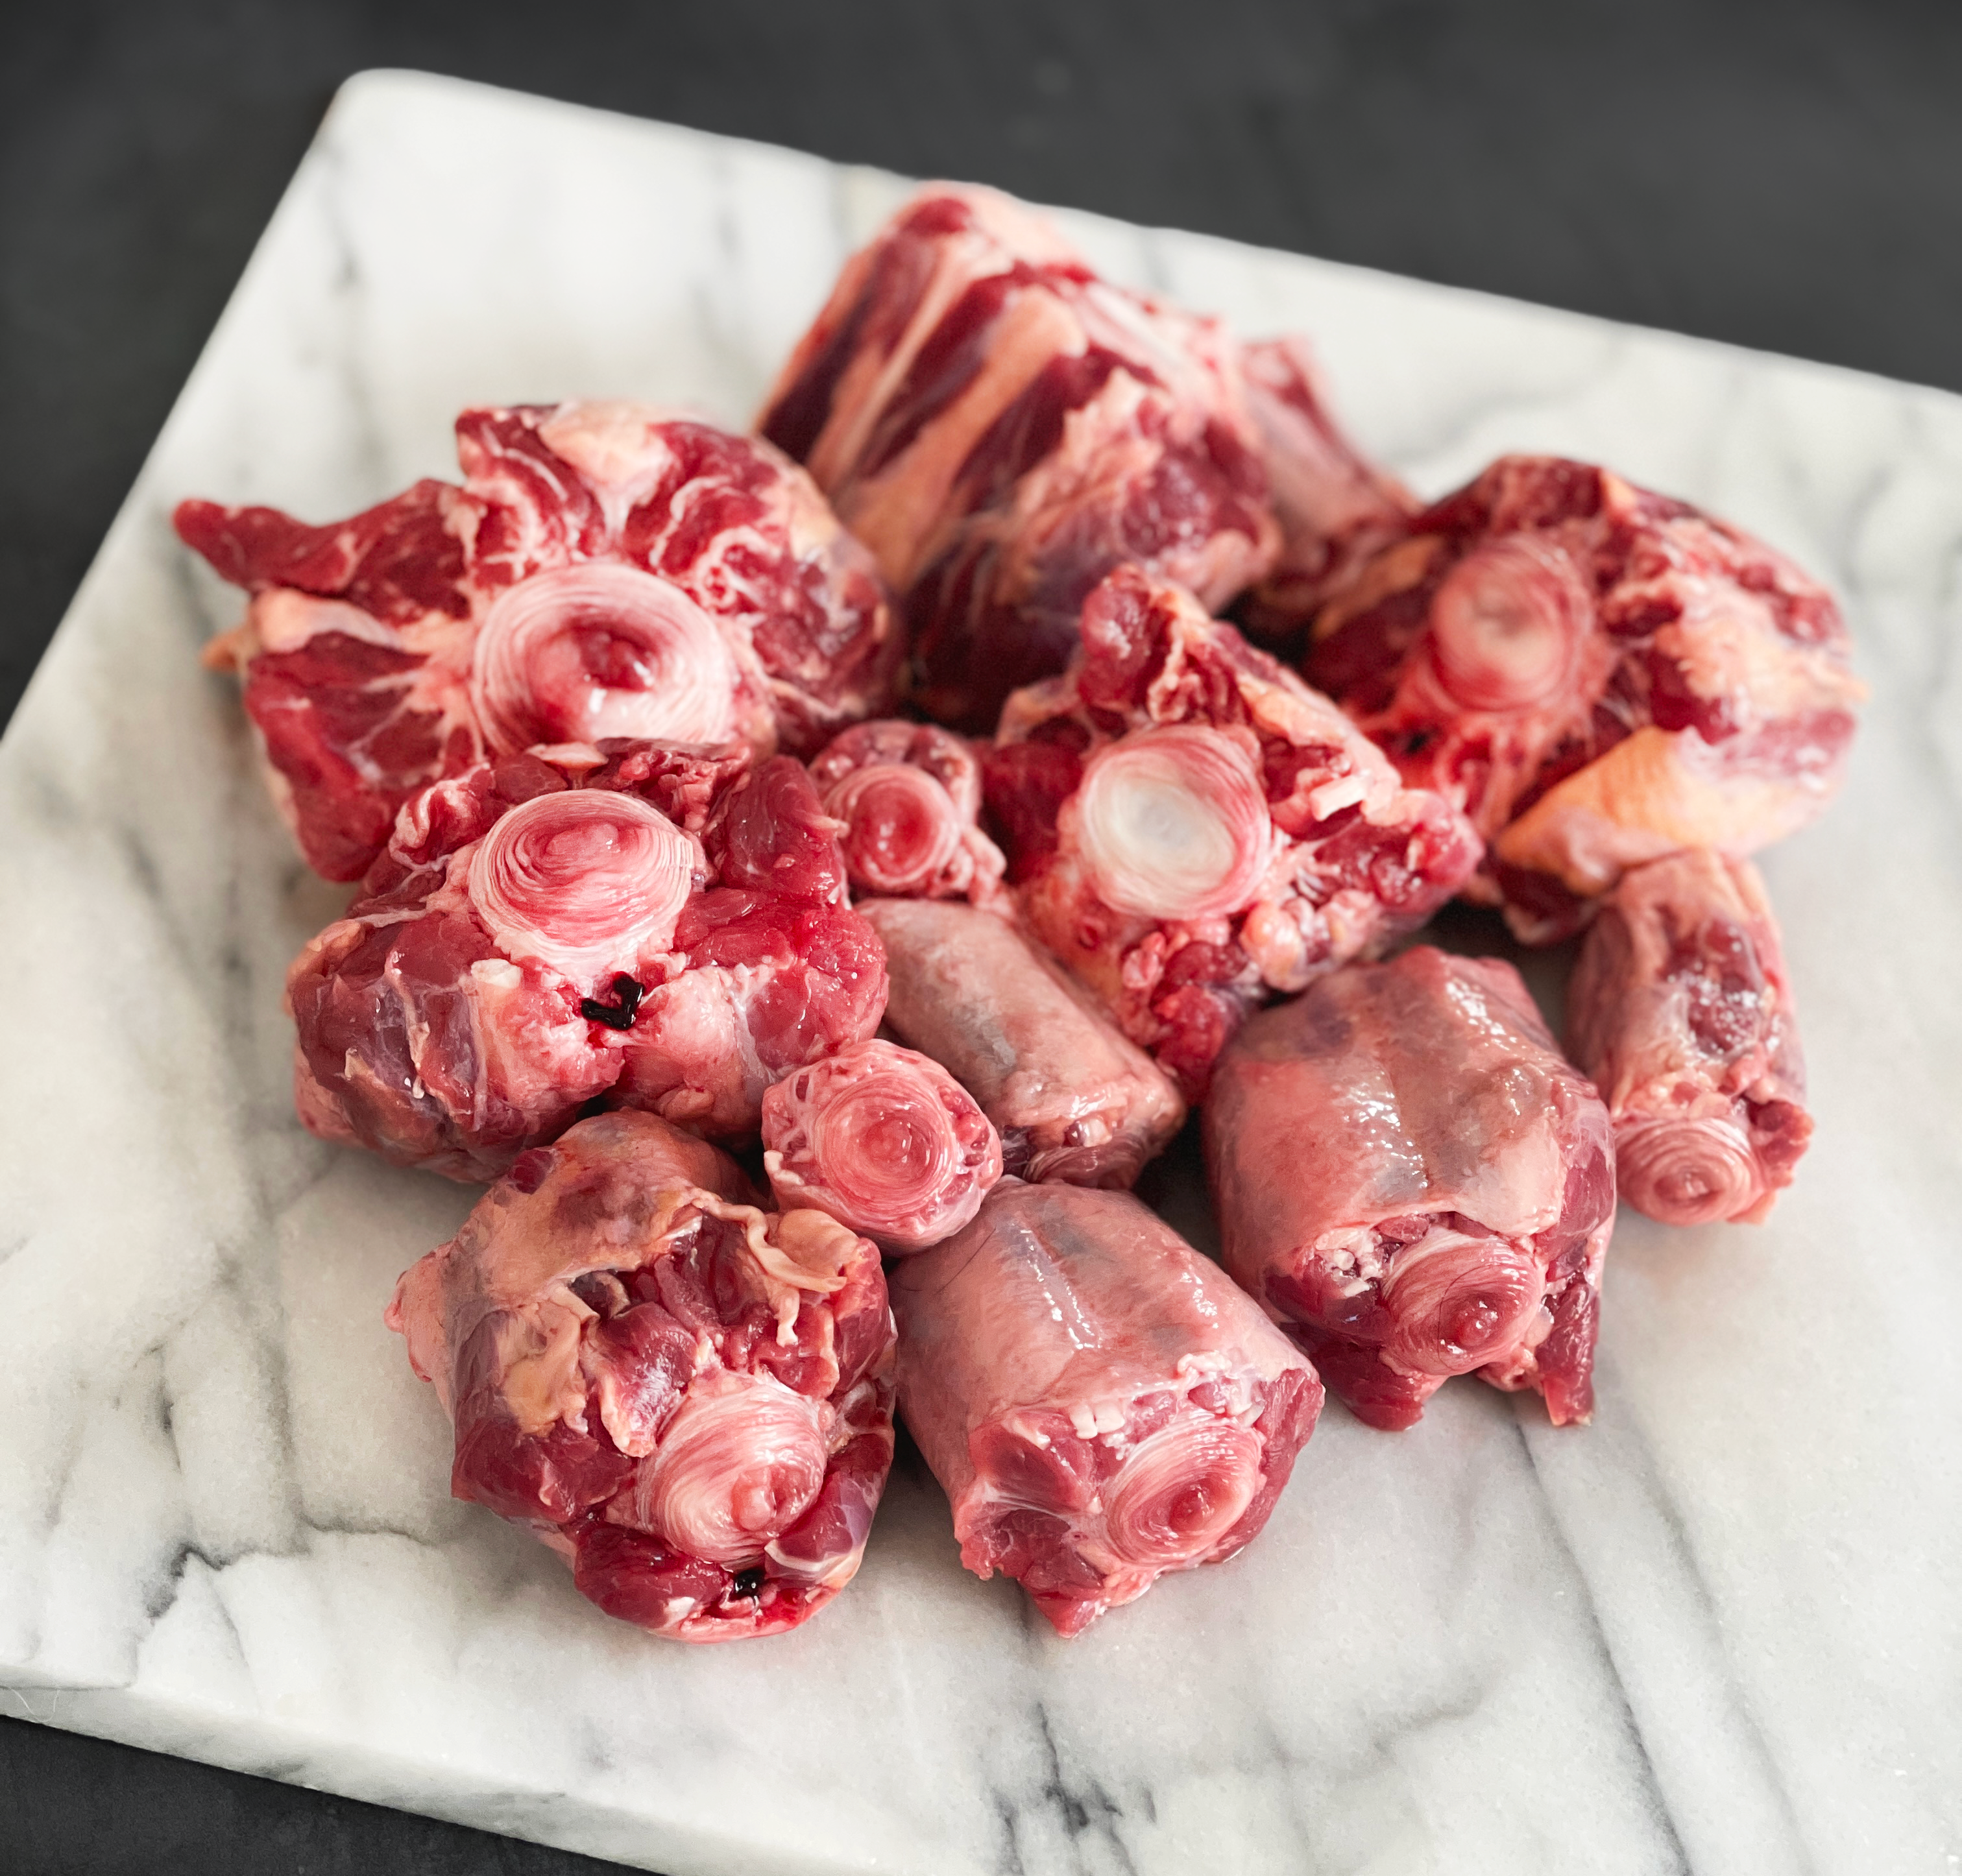 Grassfed Beef Oxtail Sliced